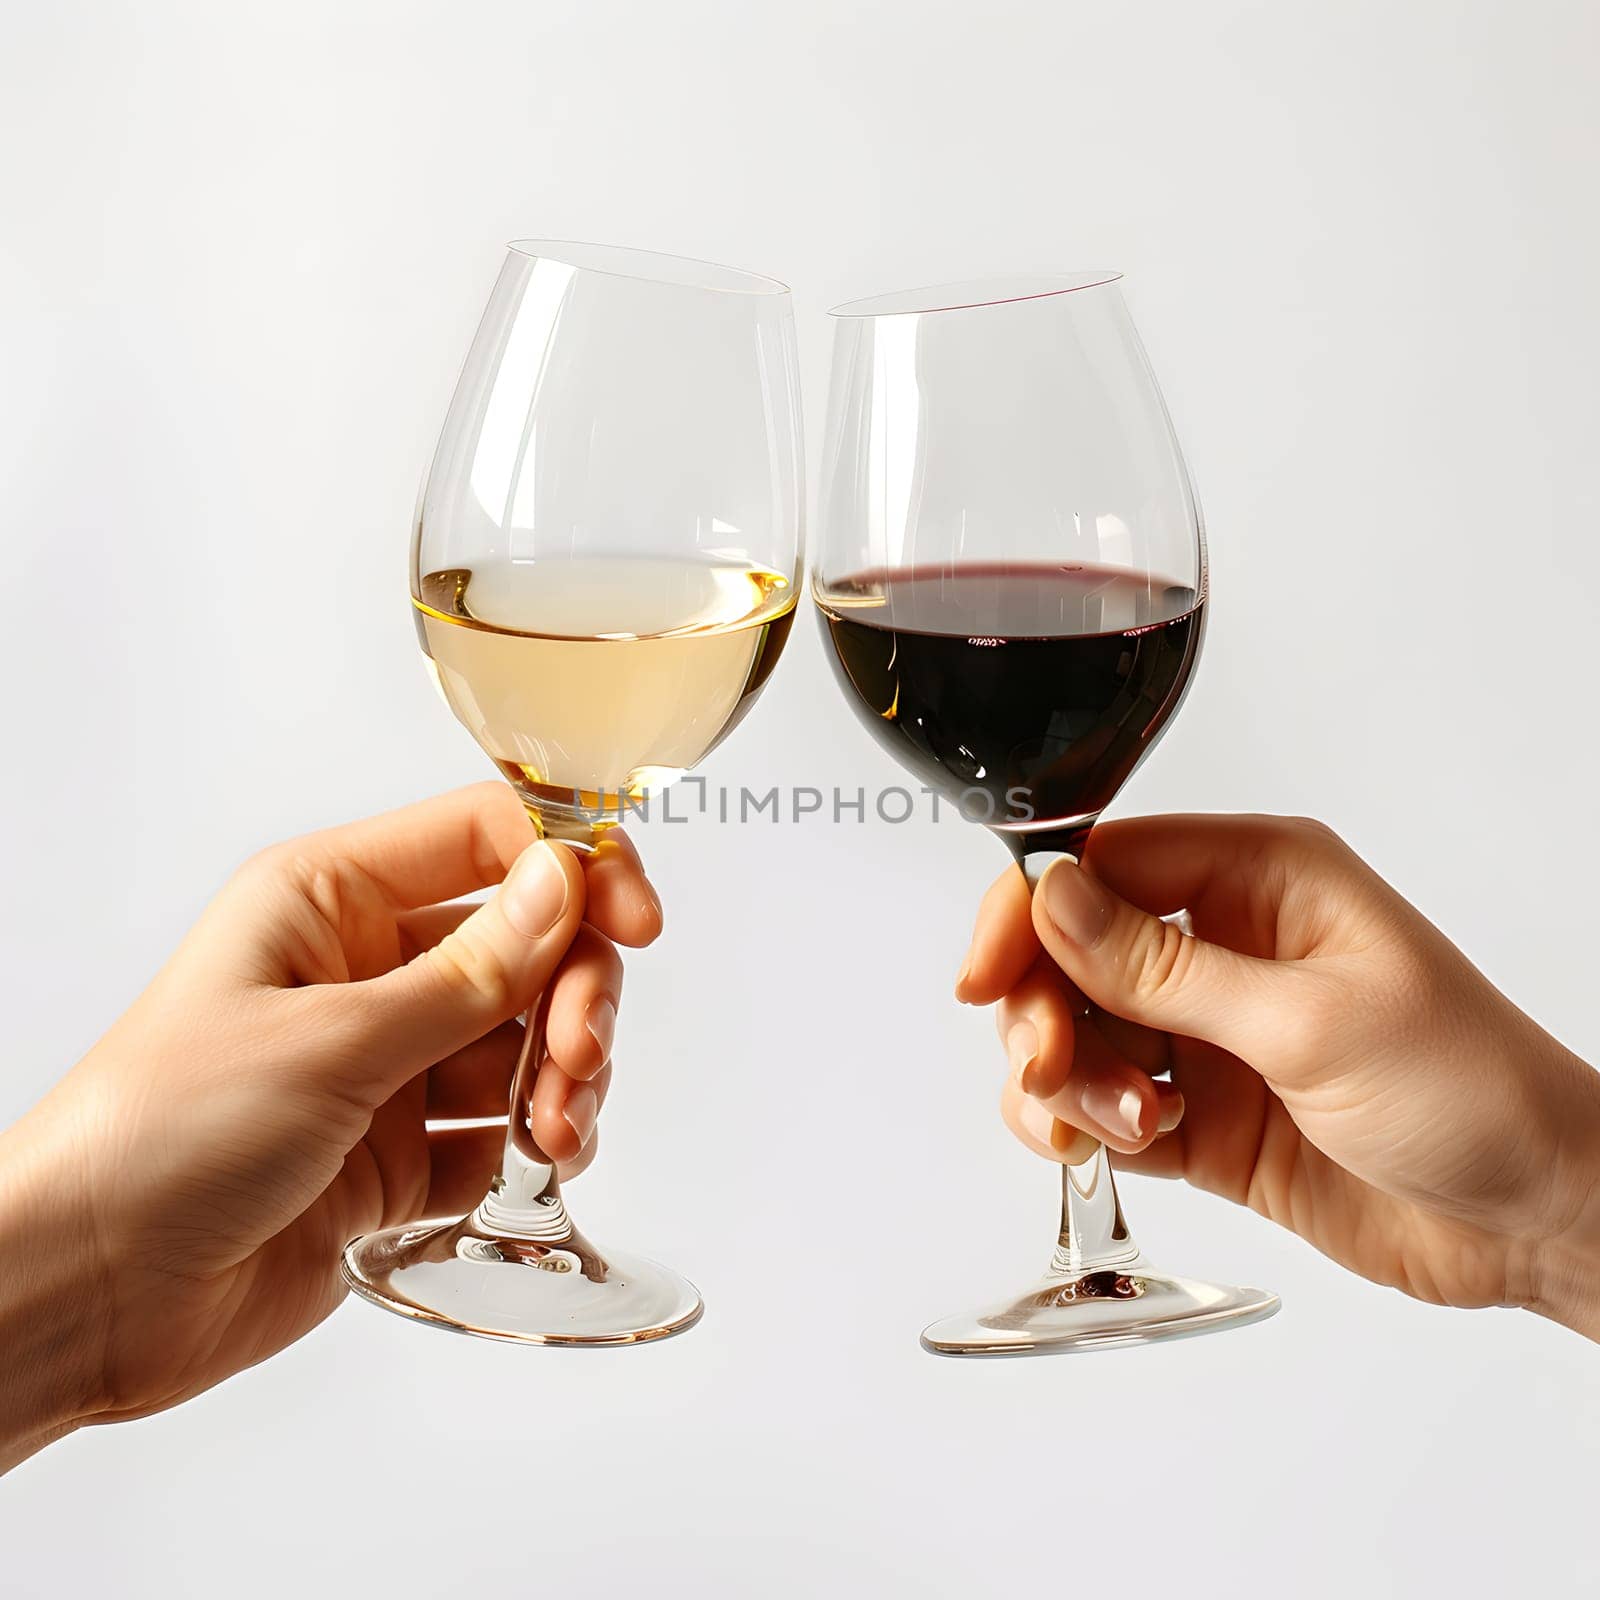 Two individuals are raising elegant wine glasses in a celebratory gesture. The stemware is filled with a rich red liquid, creating an artistic scene of camaraderie and enjoyment in a barware setting